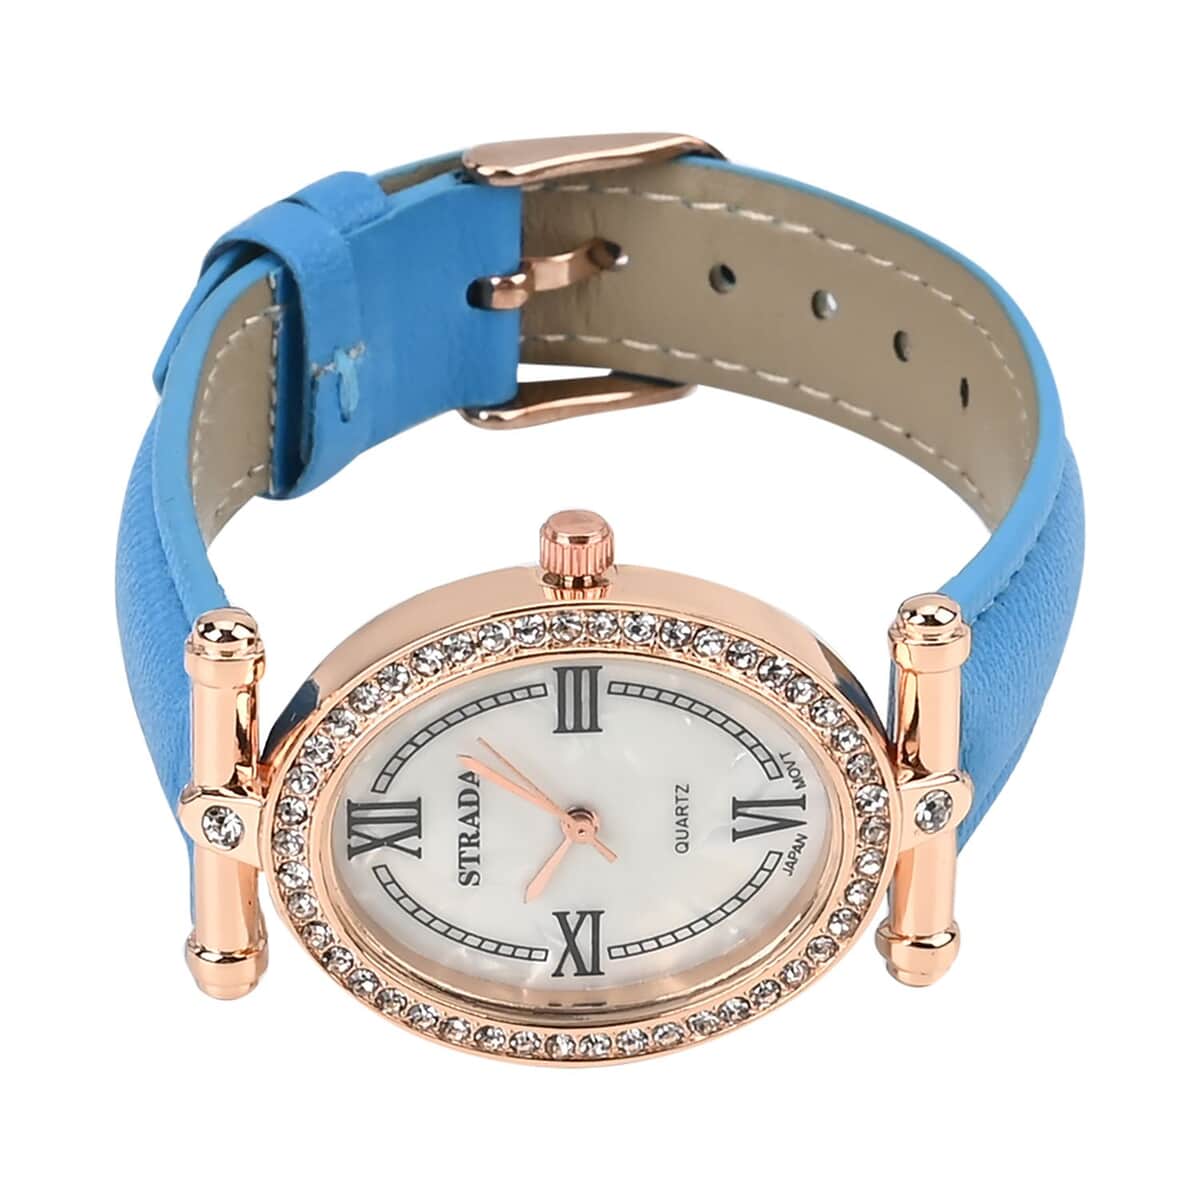 Strada White Austrian Crystal Japanese Movement Watch in Rosetone with Blue Faux Leather Strap (27.94-34.29mm) (6.75-8.50 Inches) image number 4